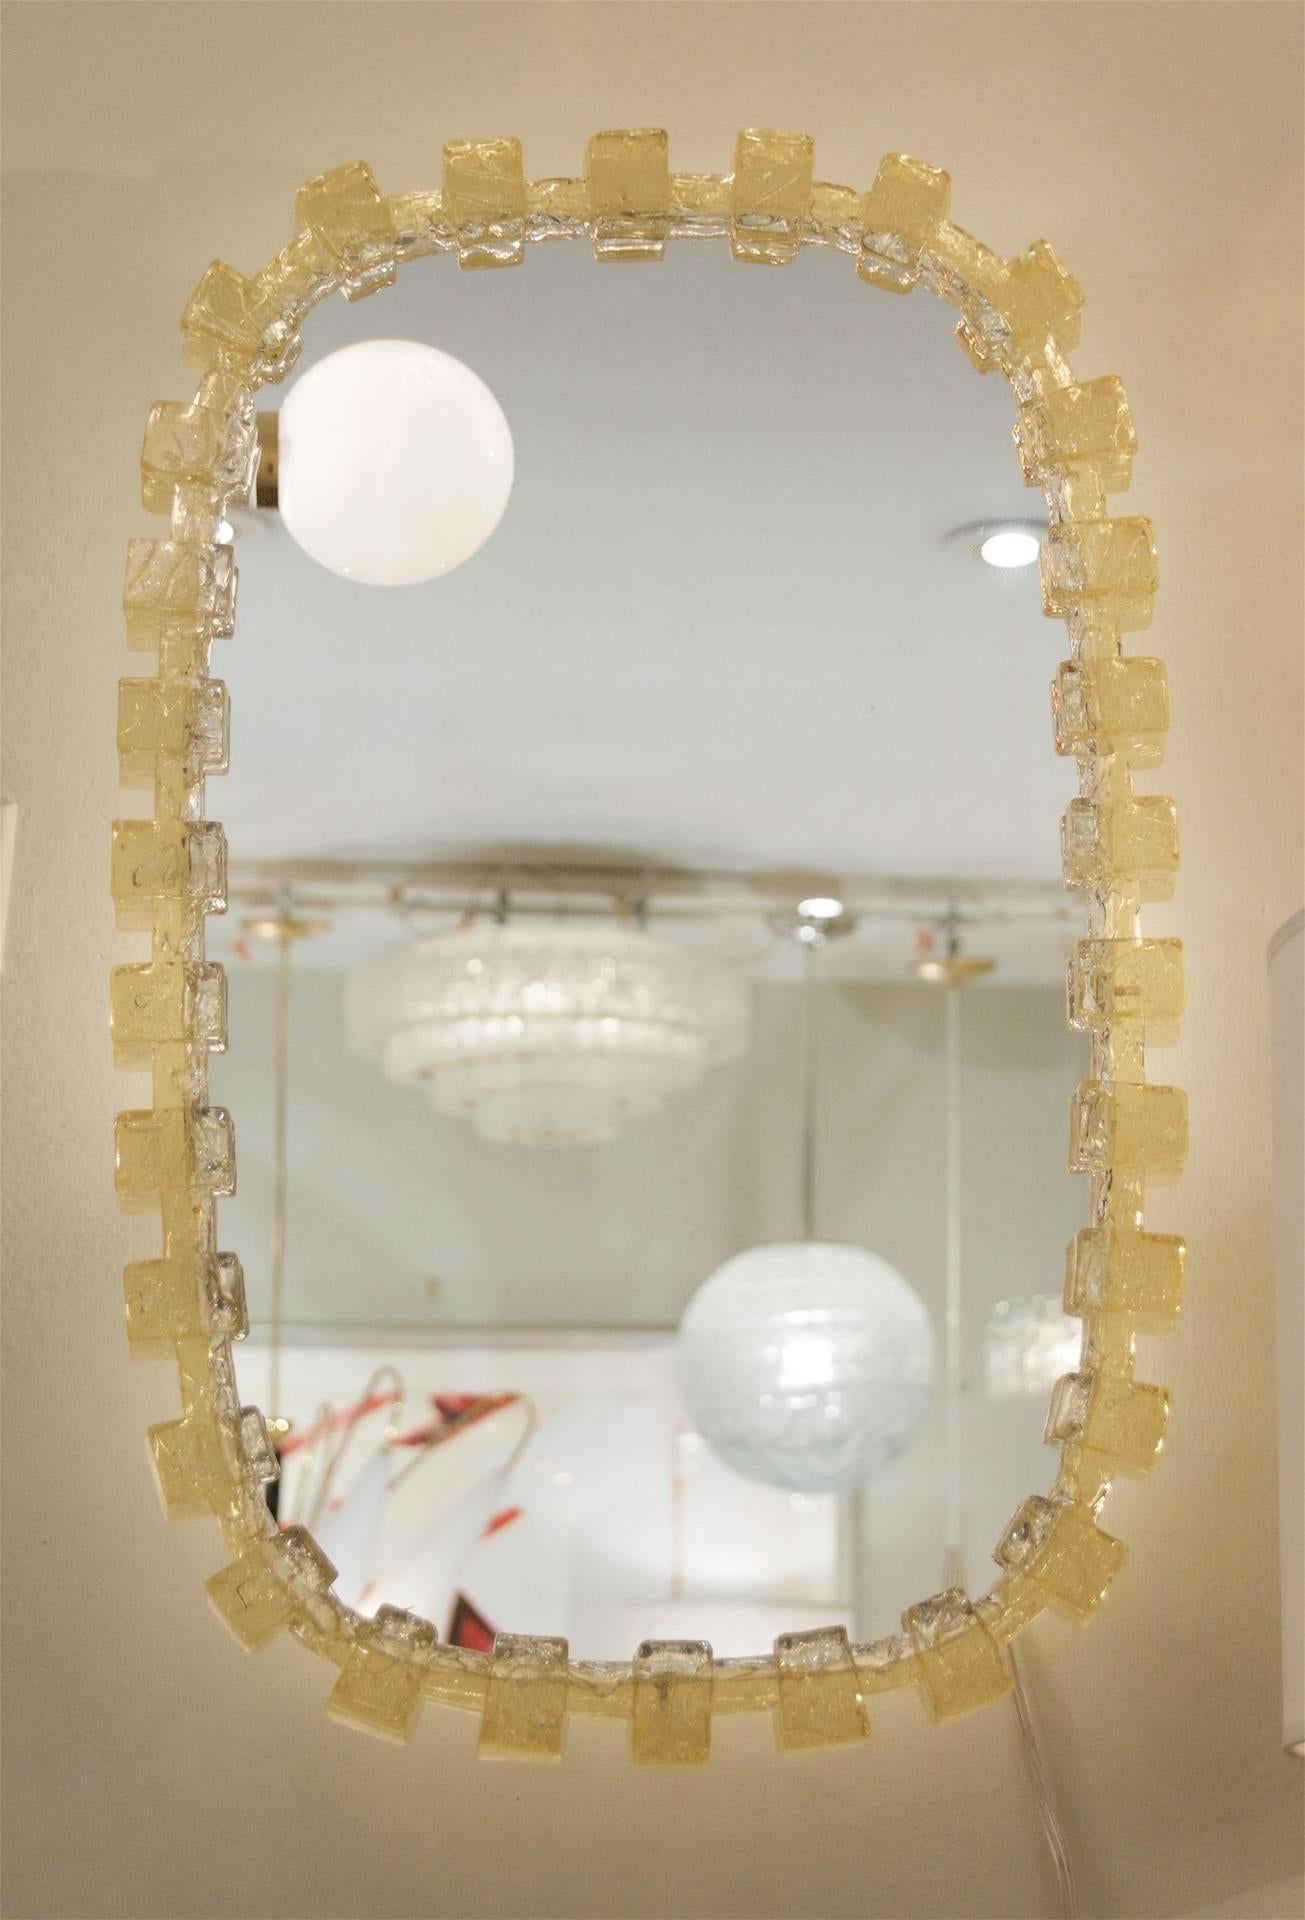 Beautiful Lucite framed mirror with interior lights. Perfect sizing for a vanity or powder room. 

Takes six E-14 base bulbs up to 40 watts per bulb, new wiring.